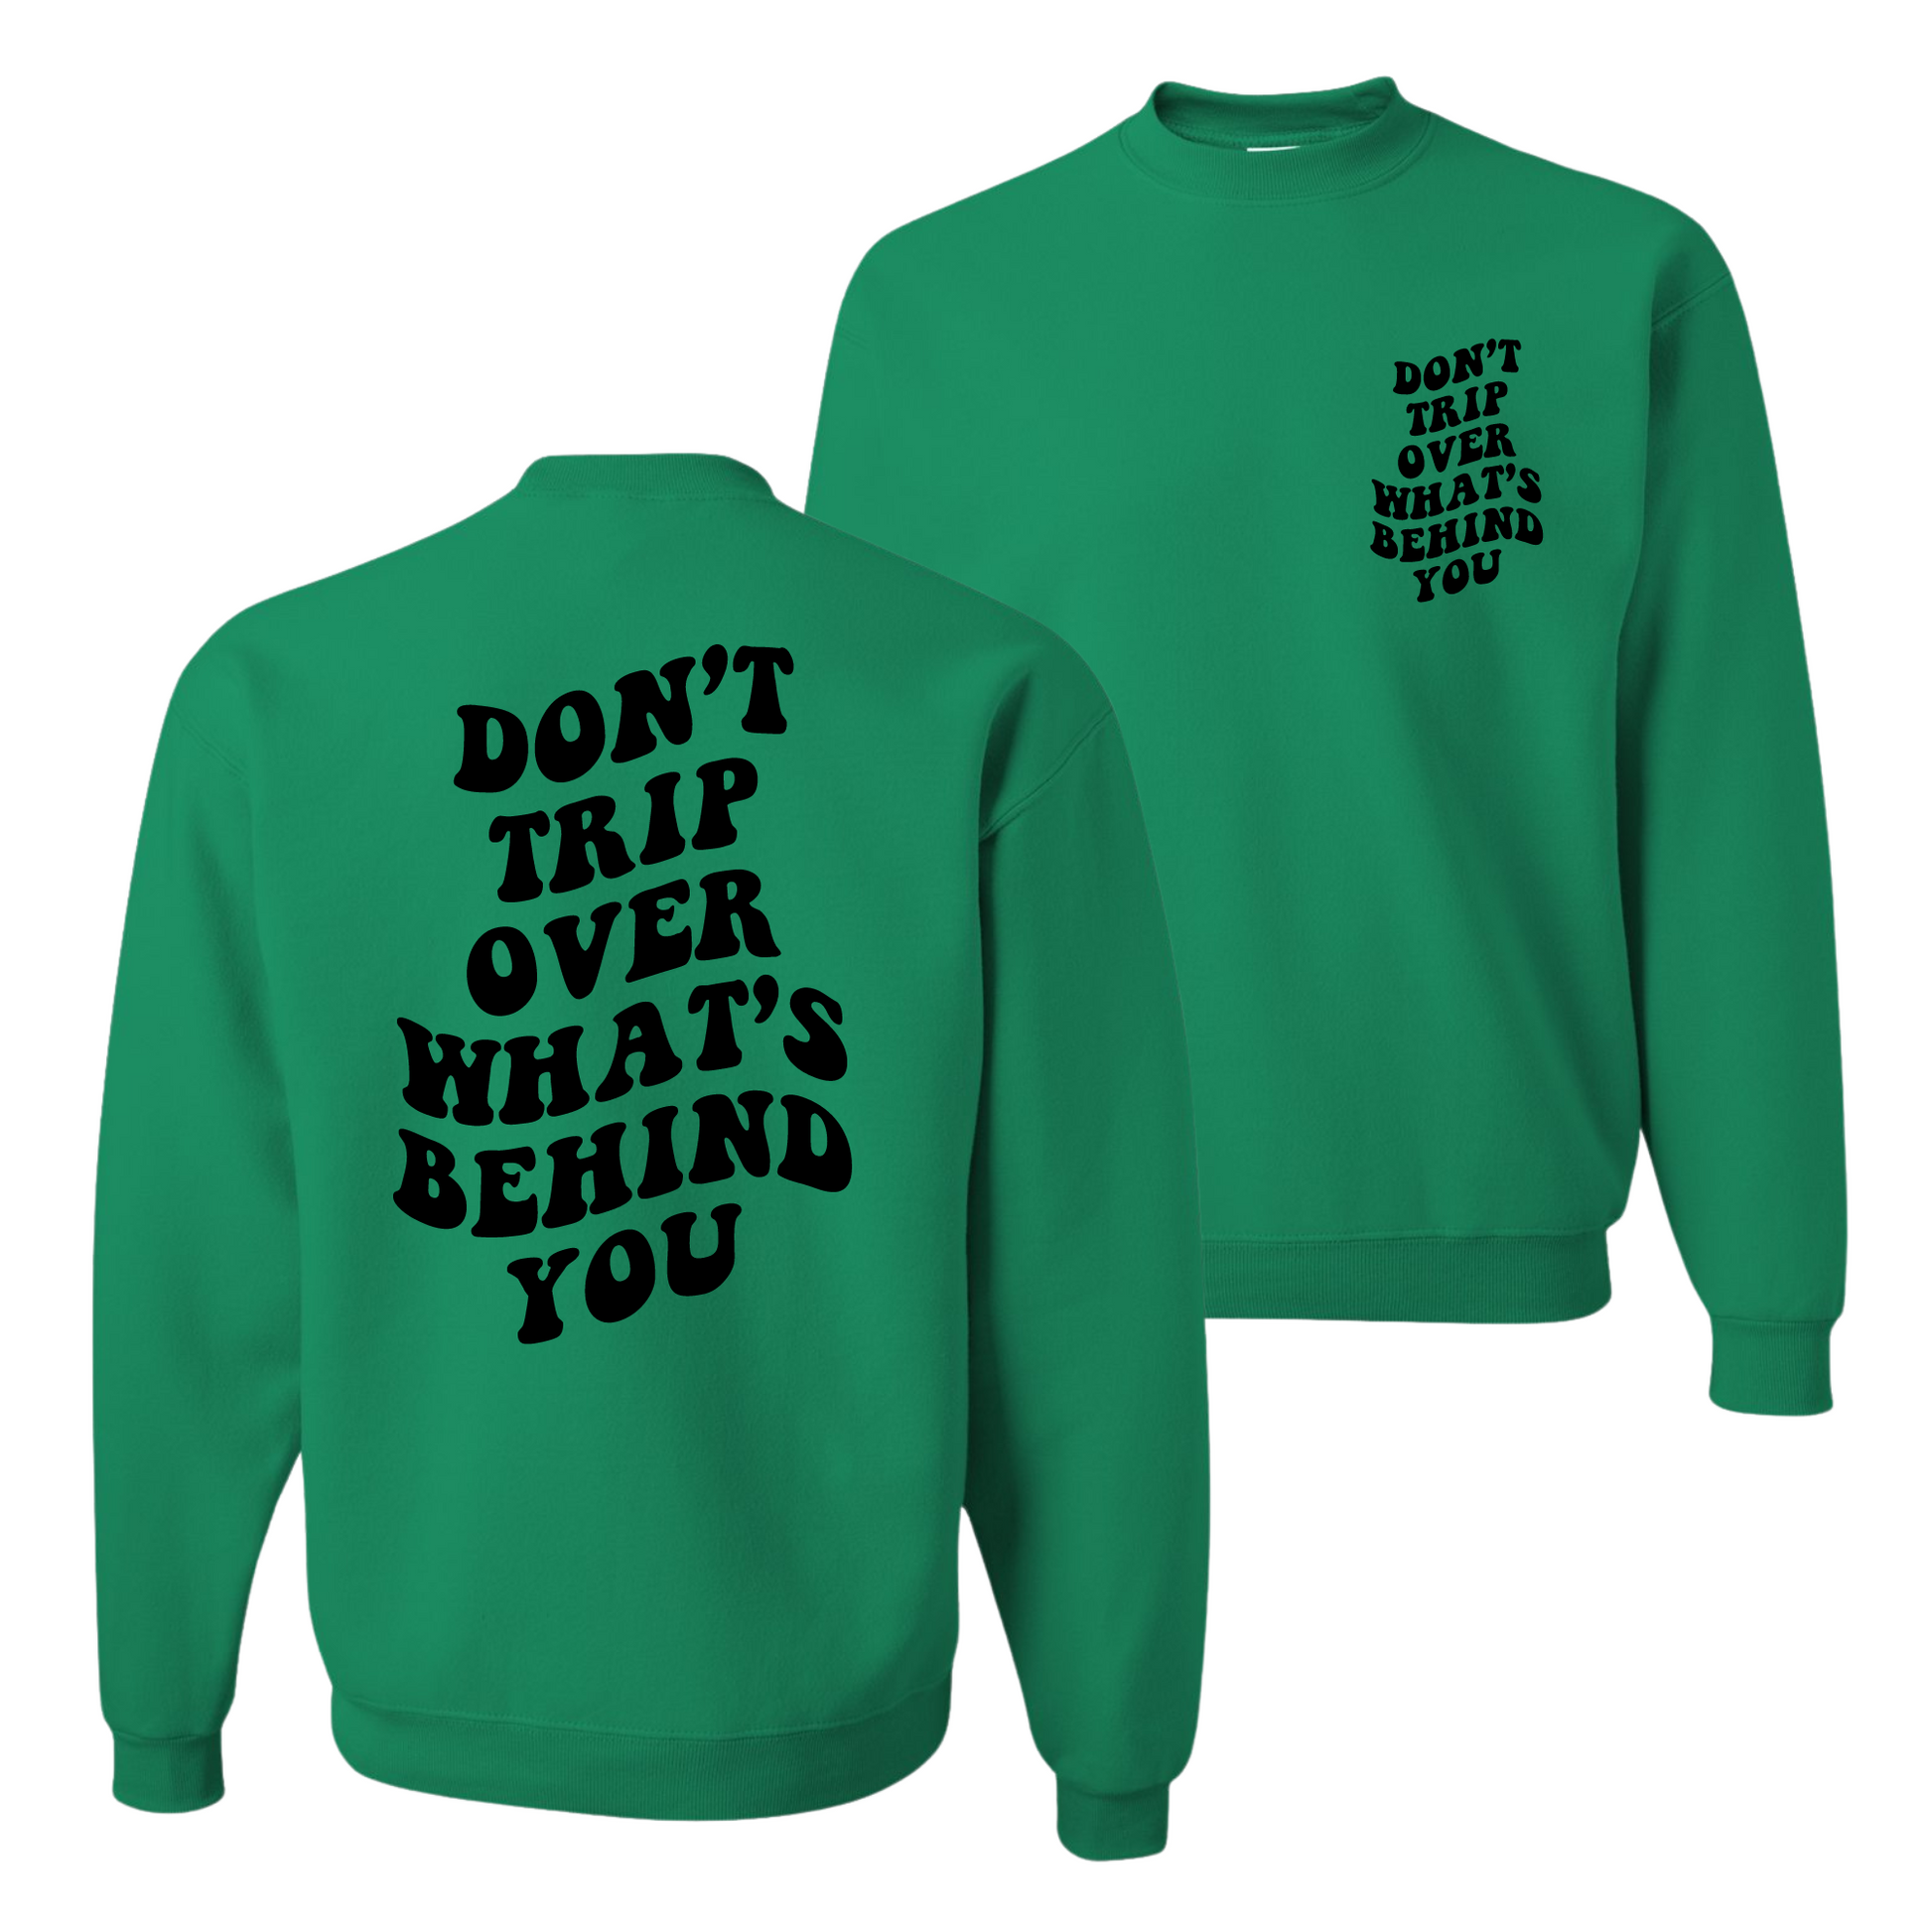 Resiliently Bold Don't Trip Over What's Behind You Kelly Green Unisex Crewneck Sweatshirt